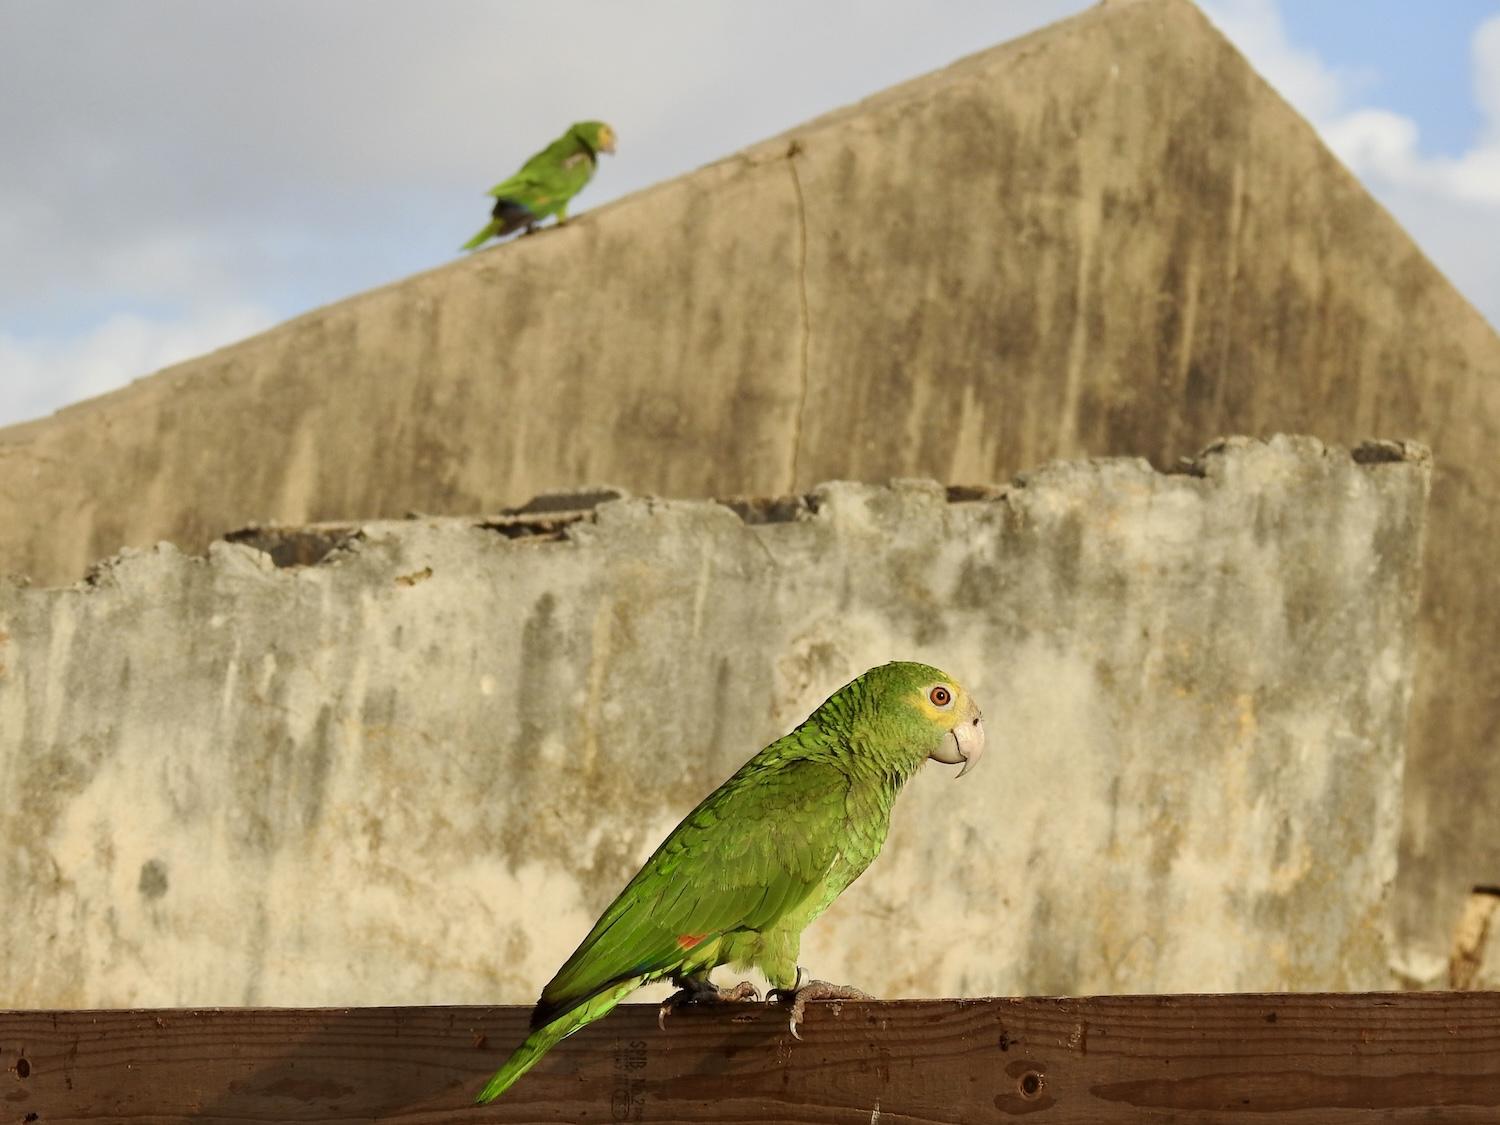 Two Yellow-shouldered amazons, a parrot known as a Lora in Aruba, fly about Plantage Prins in Arikok National Park.